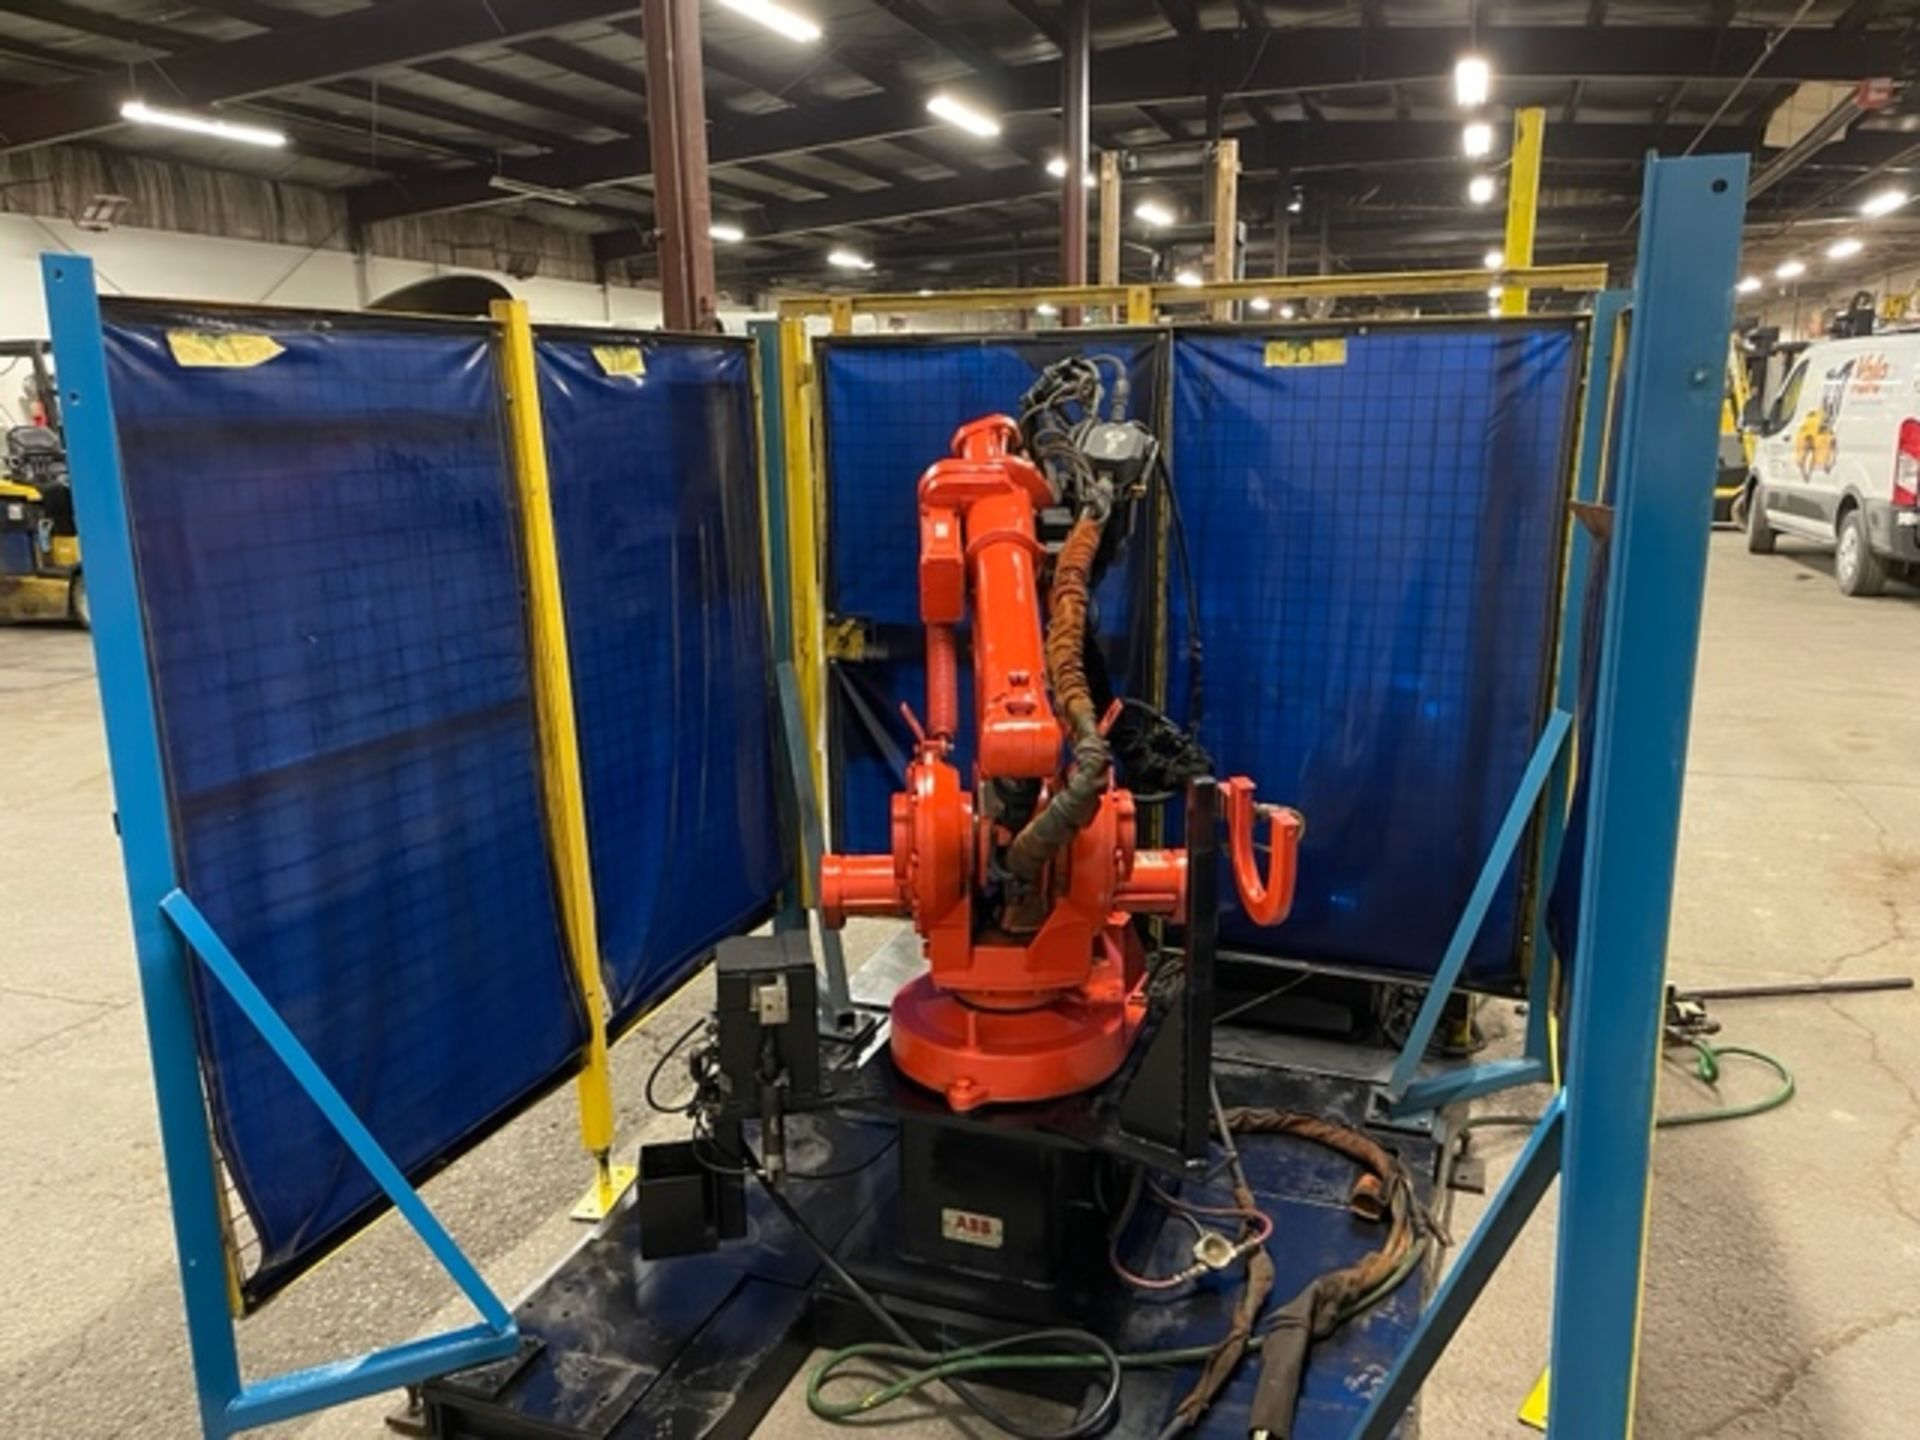 ABB Robot IRB 1400 M98 Welding Robot Cell with Controller & Miller Auto Invision Mig Welder Teach